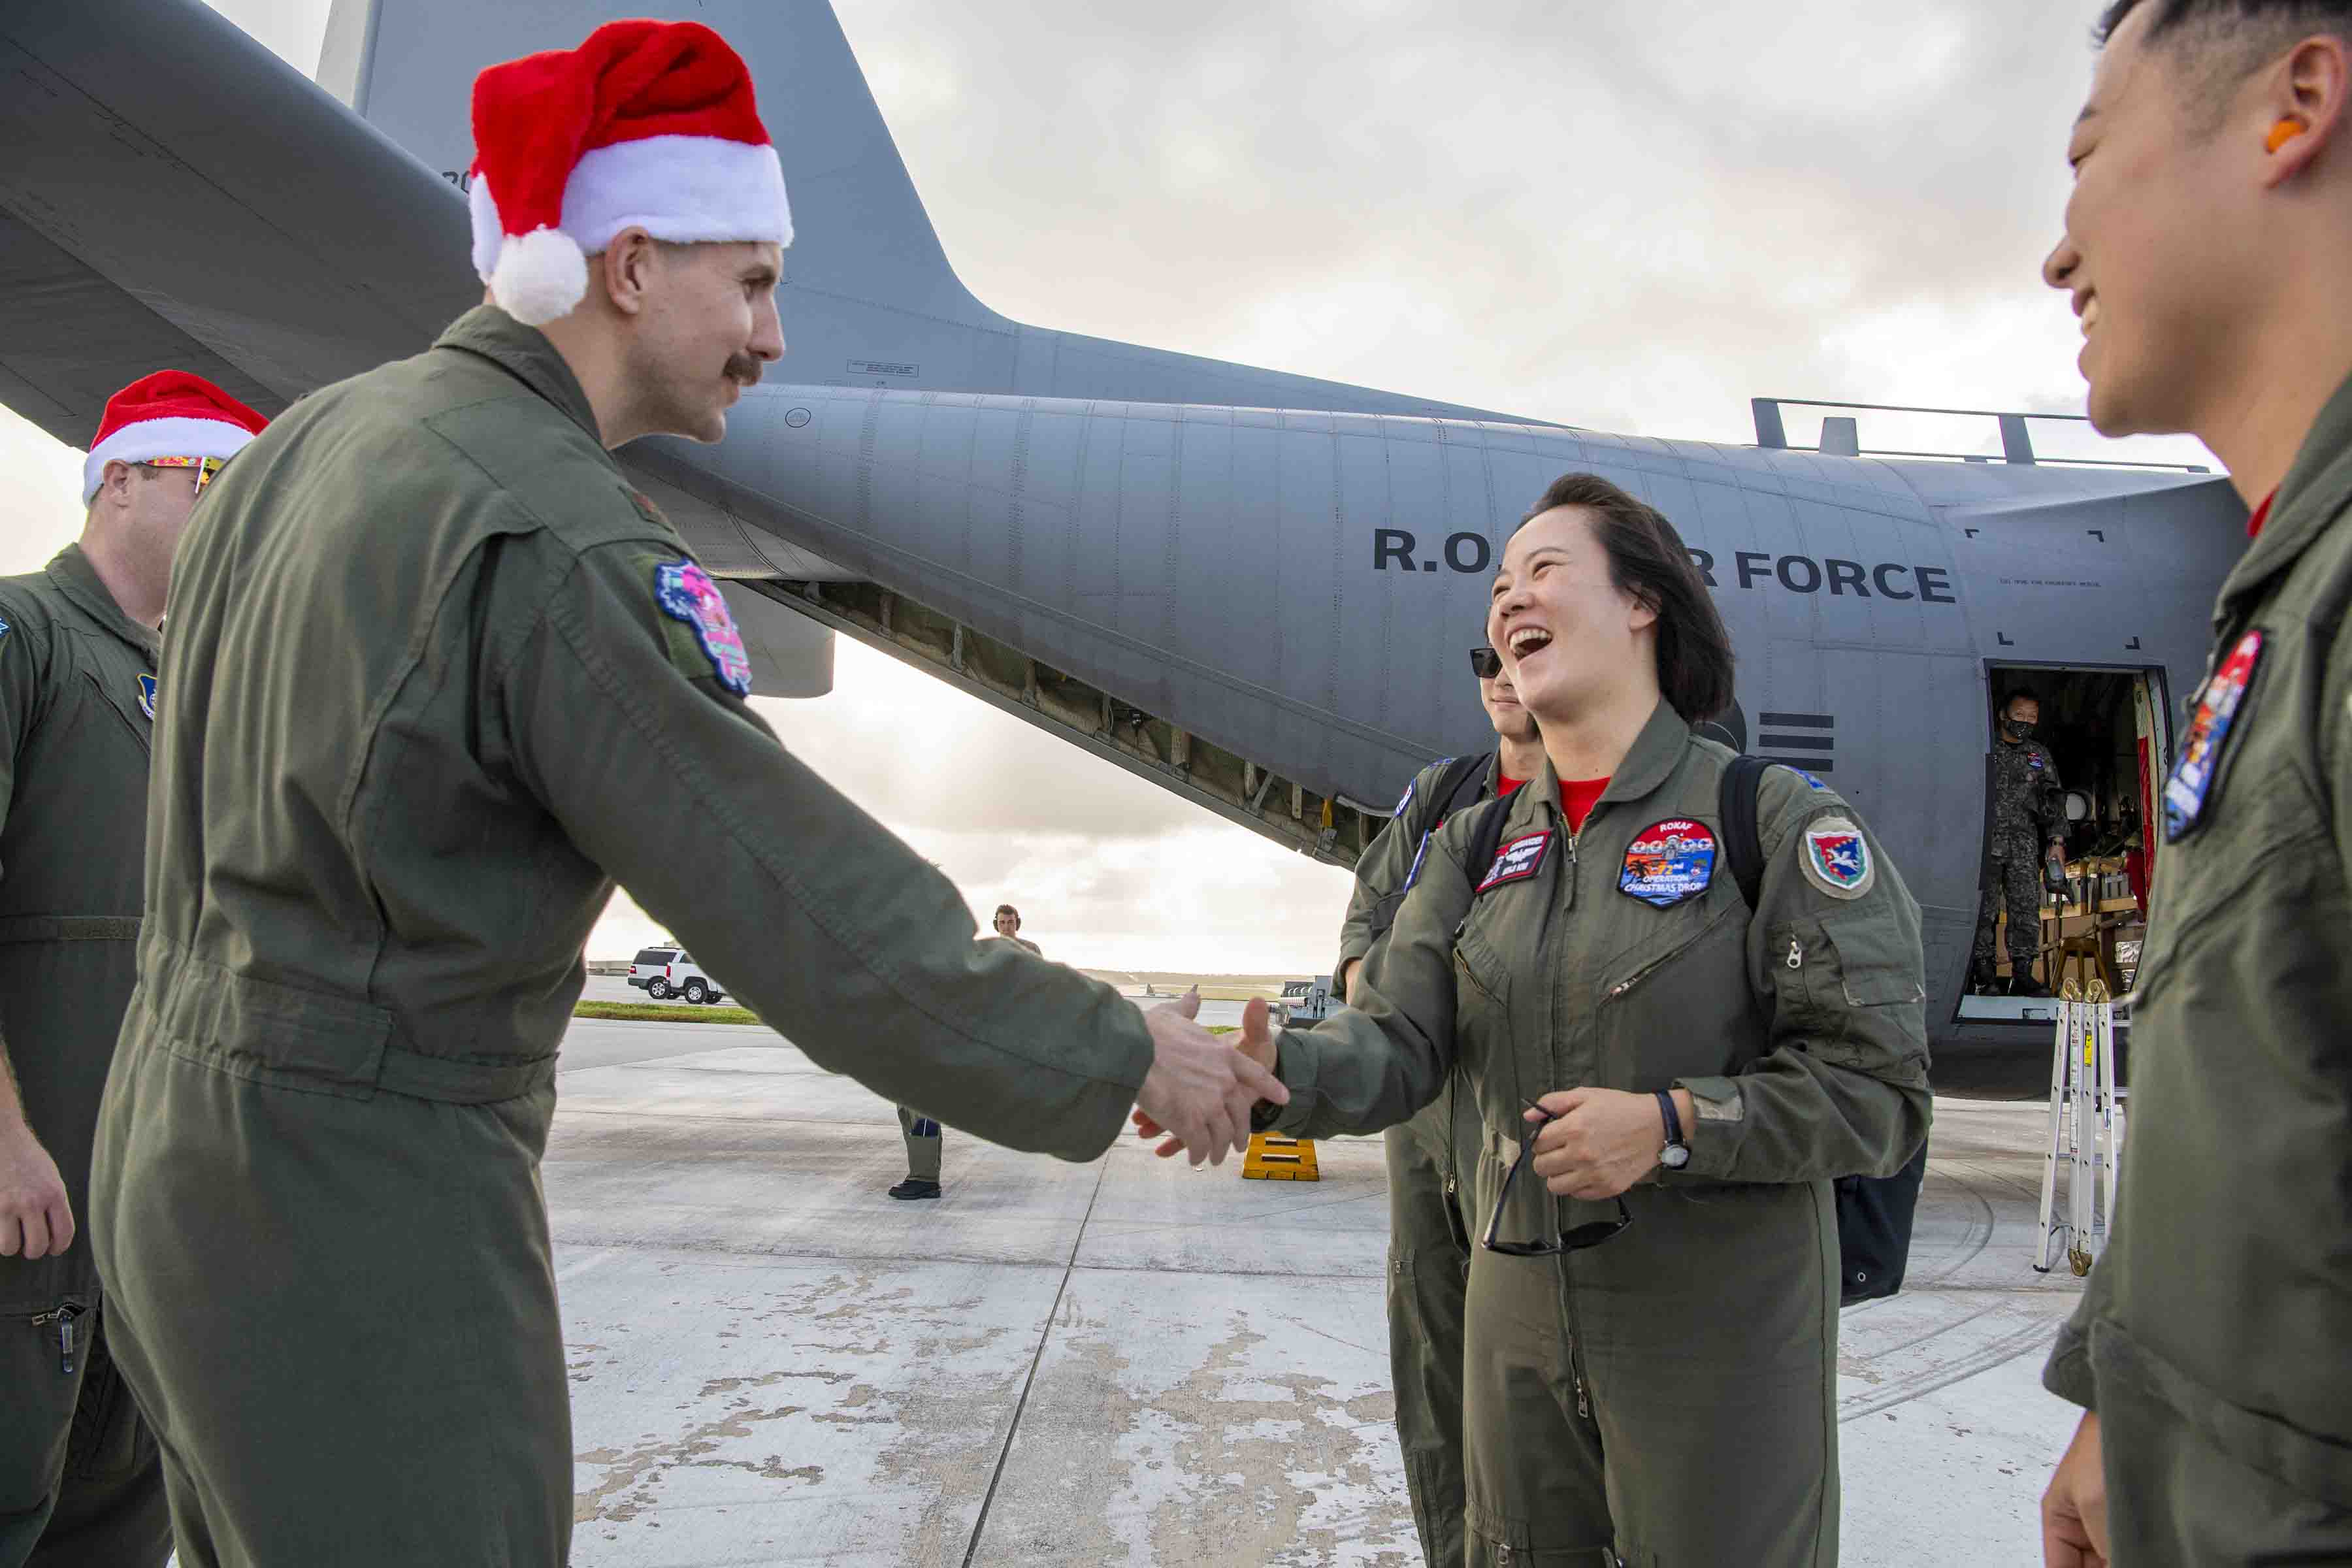 An airman in Santa hat shakes hands with a foreign service member in front of a plane parked on a flight line.